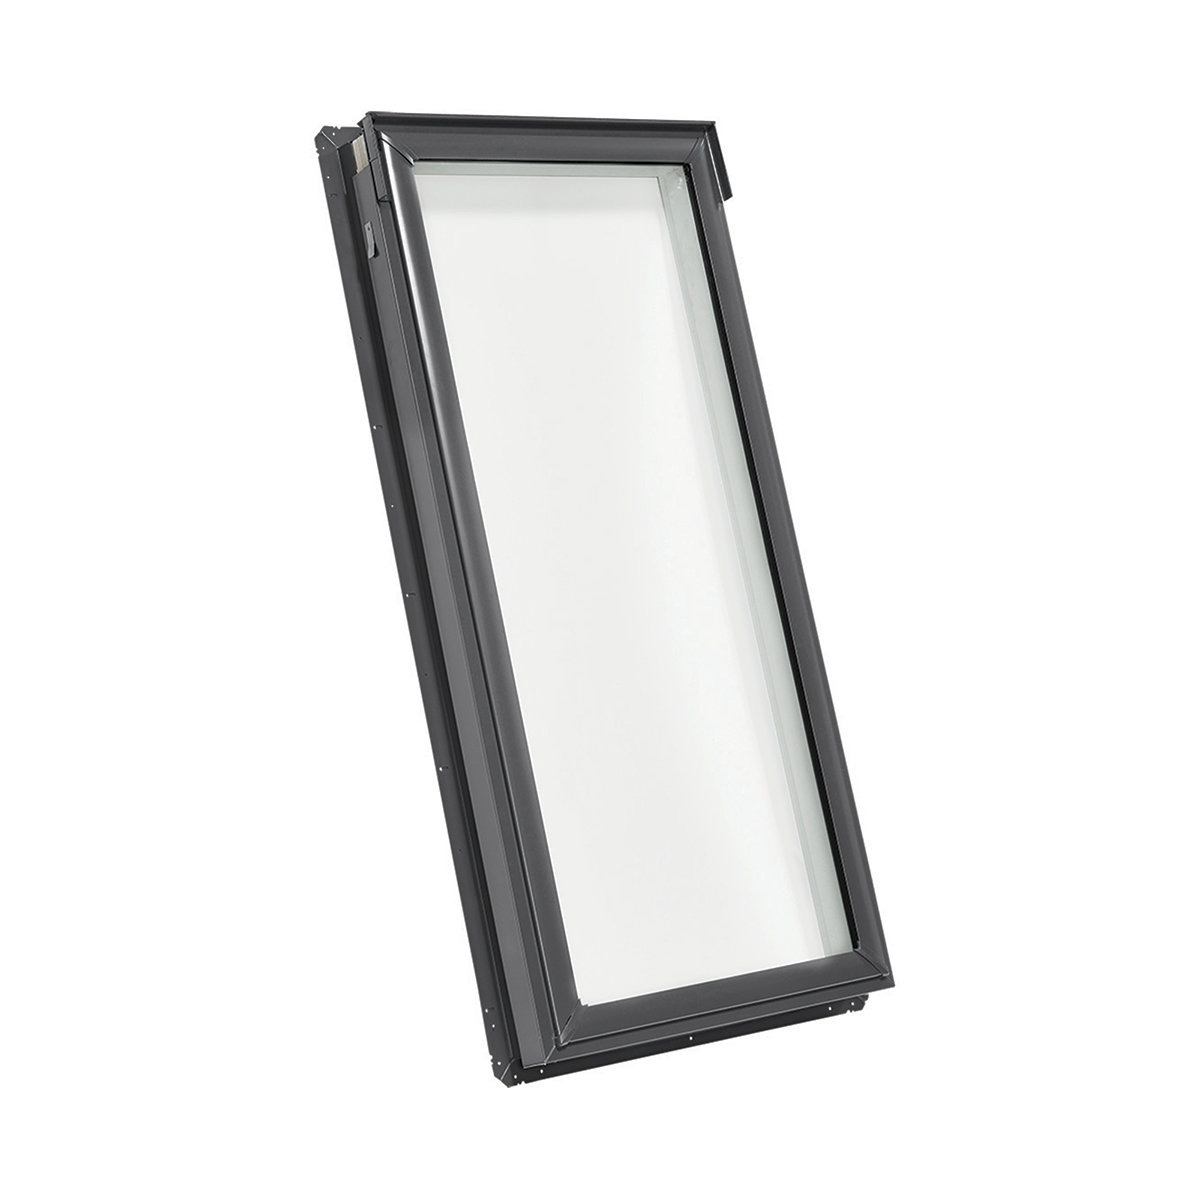 Fixed Deck-Mount Skylight with Laminated Low-E3 Glass - 21 in. x 70-1/4 in. - FS C12